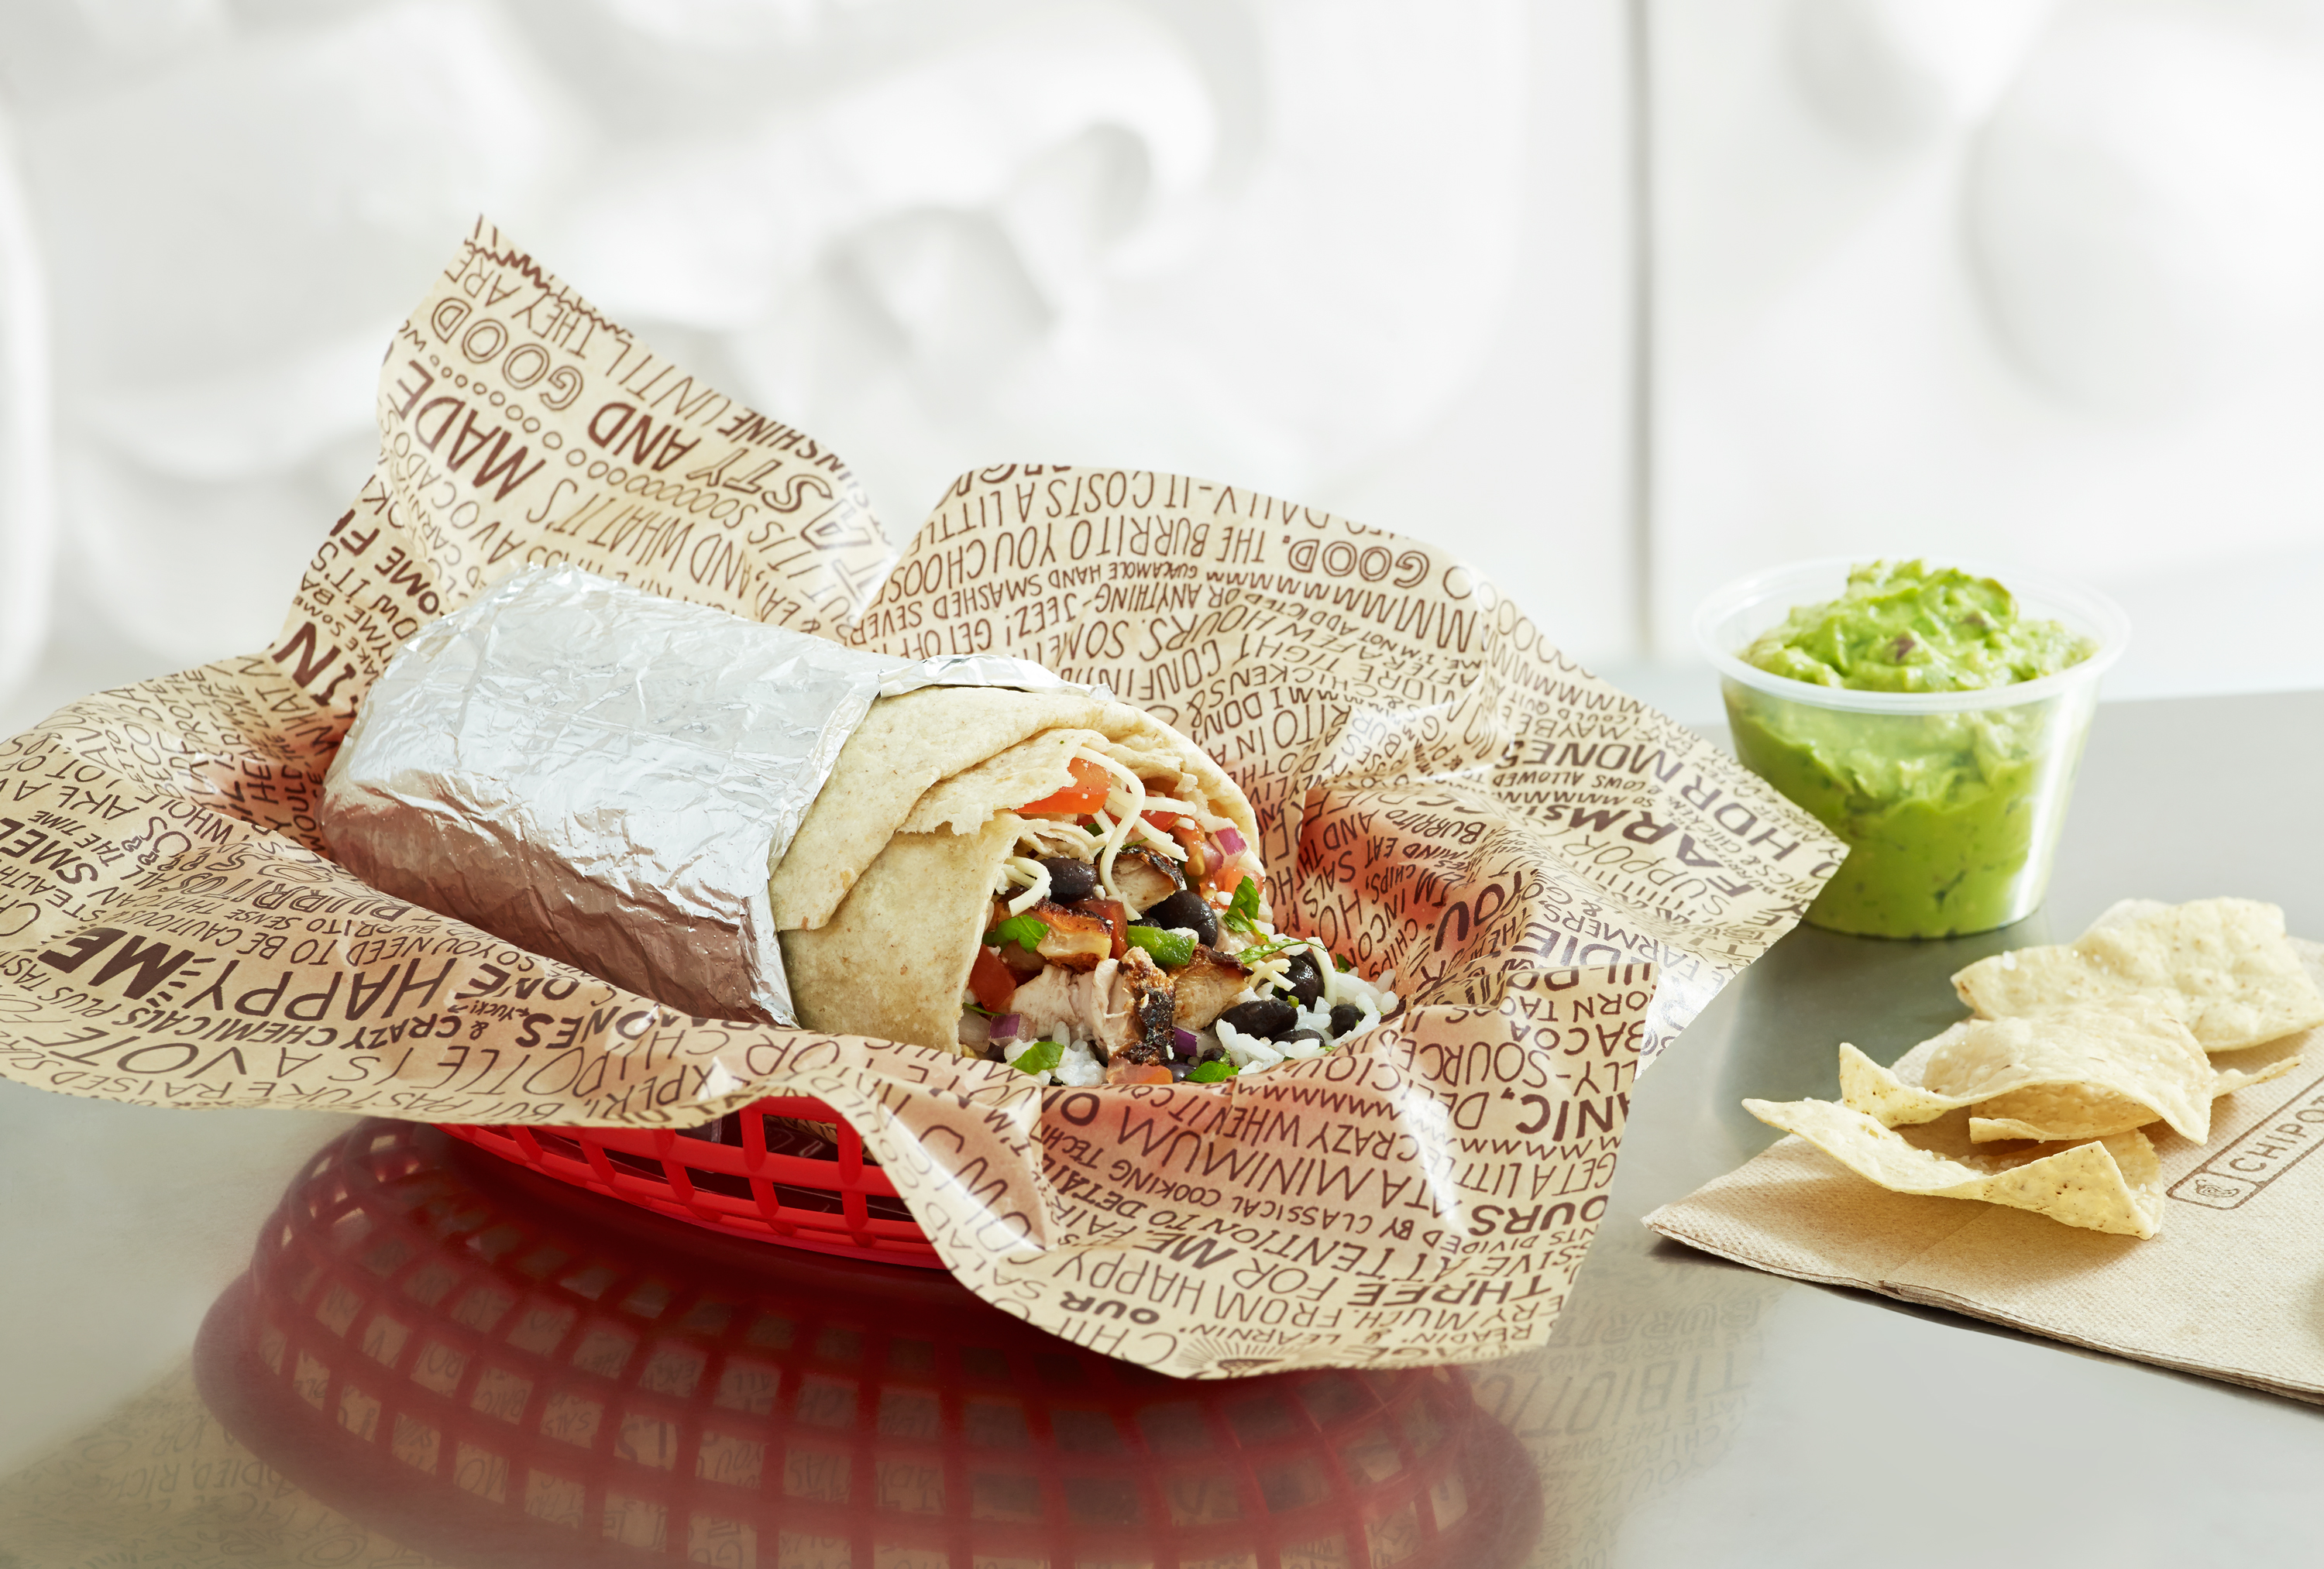 Chipotle Is Giving Away FREE Burritos. Here’s How to Get One